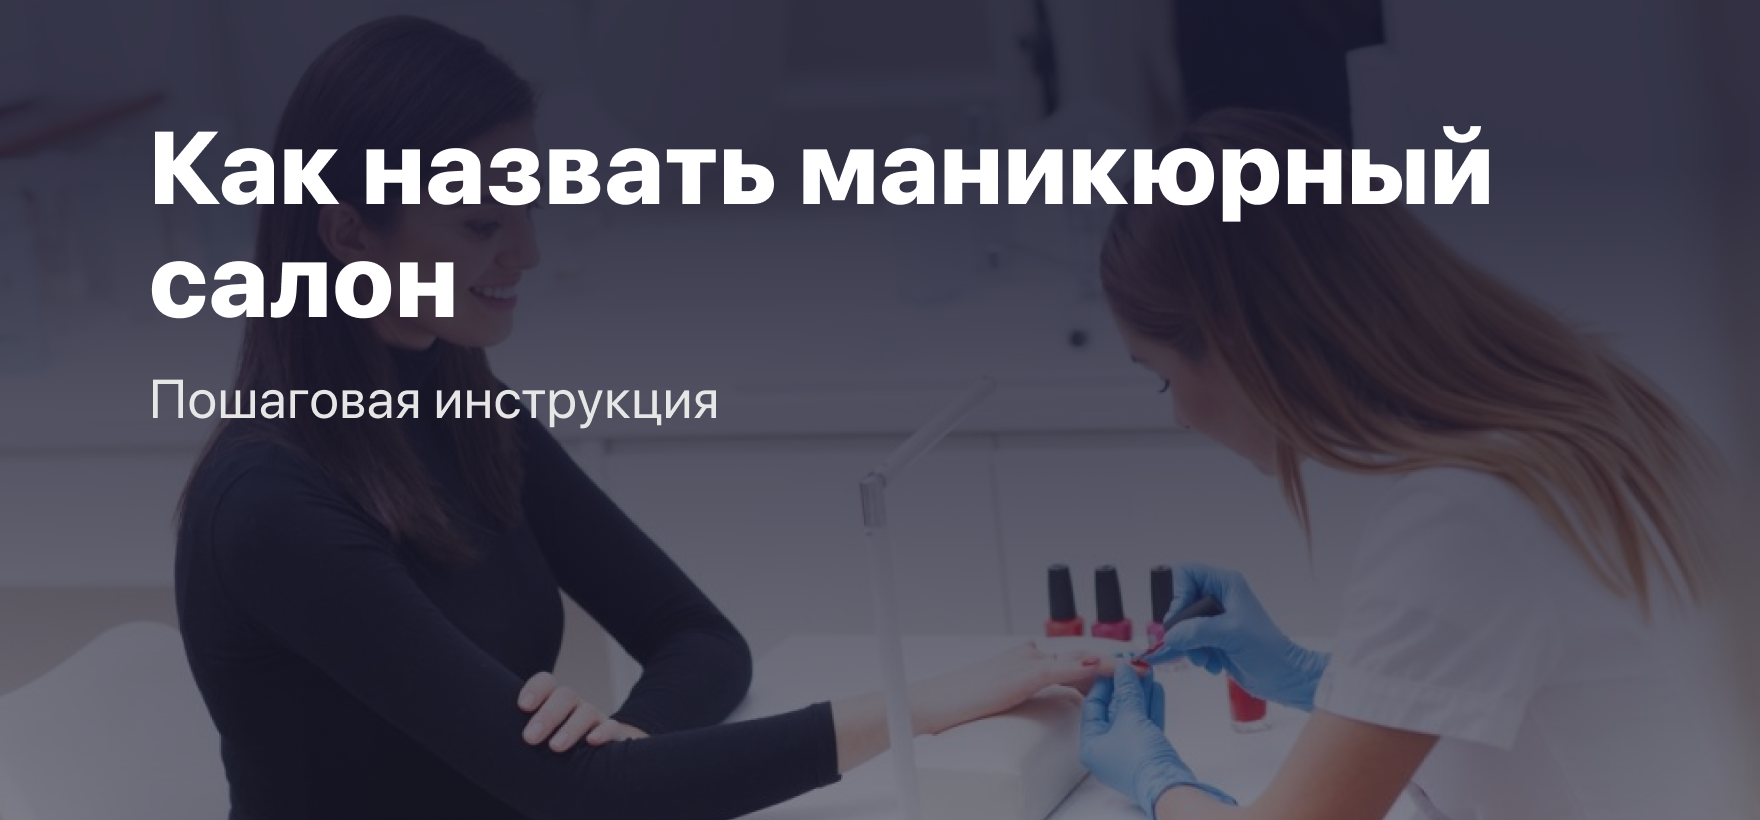 <p class="qtranxs-available-languages-message qtranxs-available-languages-message-en">Sorry, this entry is only available in <a href="https://beautyprosoftware.com/ru/blog/russkij-kak-otkryt-spa-salon-sostavljaem-biznes-plan/" class="qtranxs-available-language-link qtranxs-available-language-link-ru" title="Русский">Russian</a>.</p>